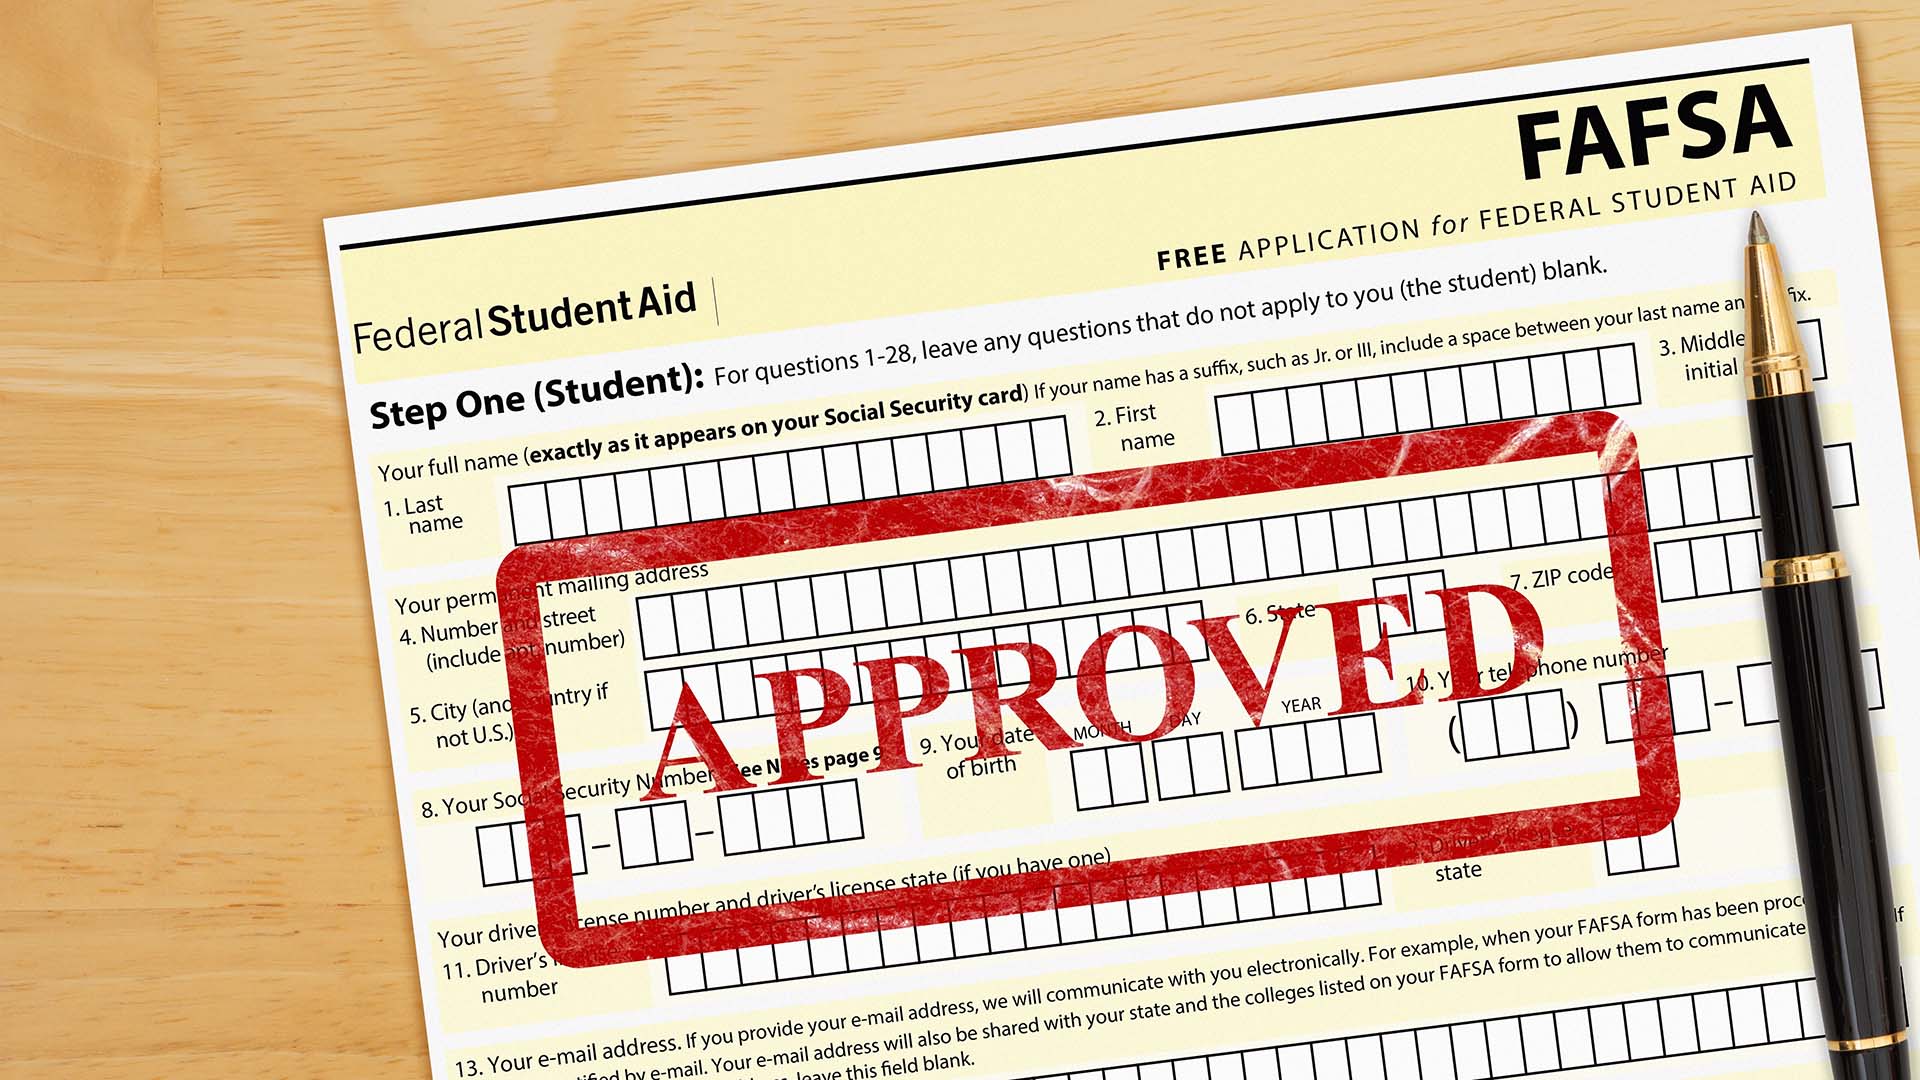 Students still have time to apply for fall aid